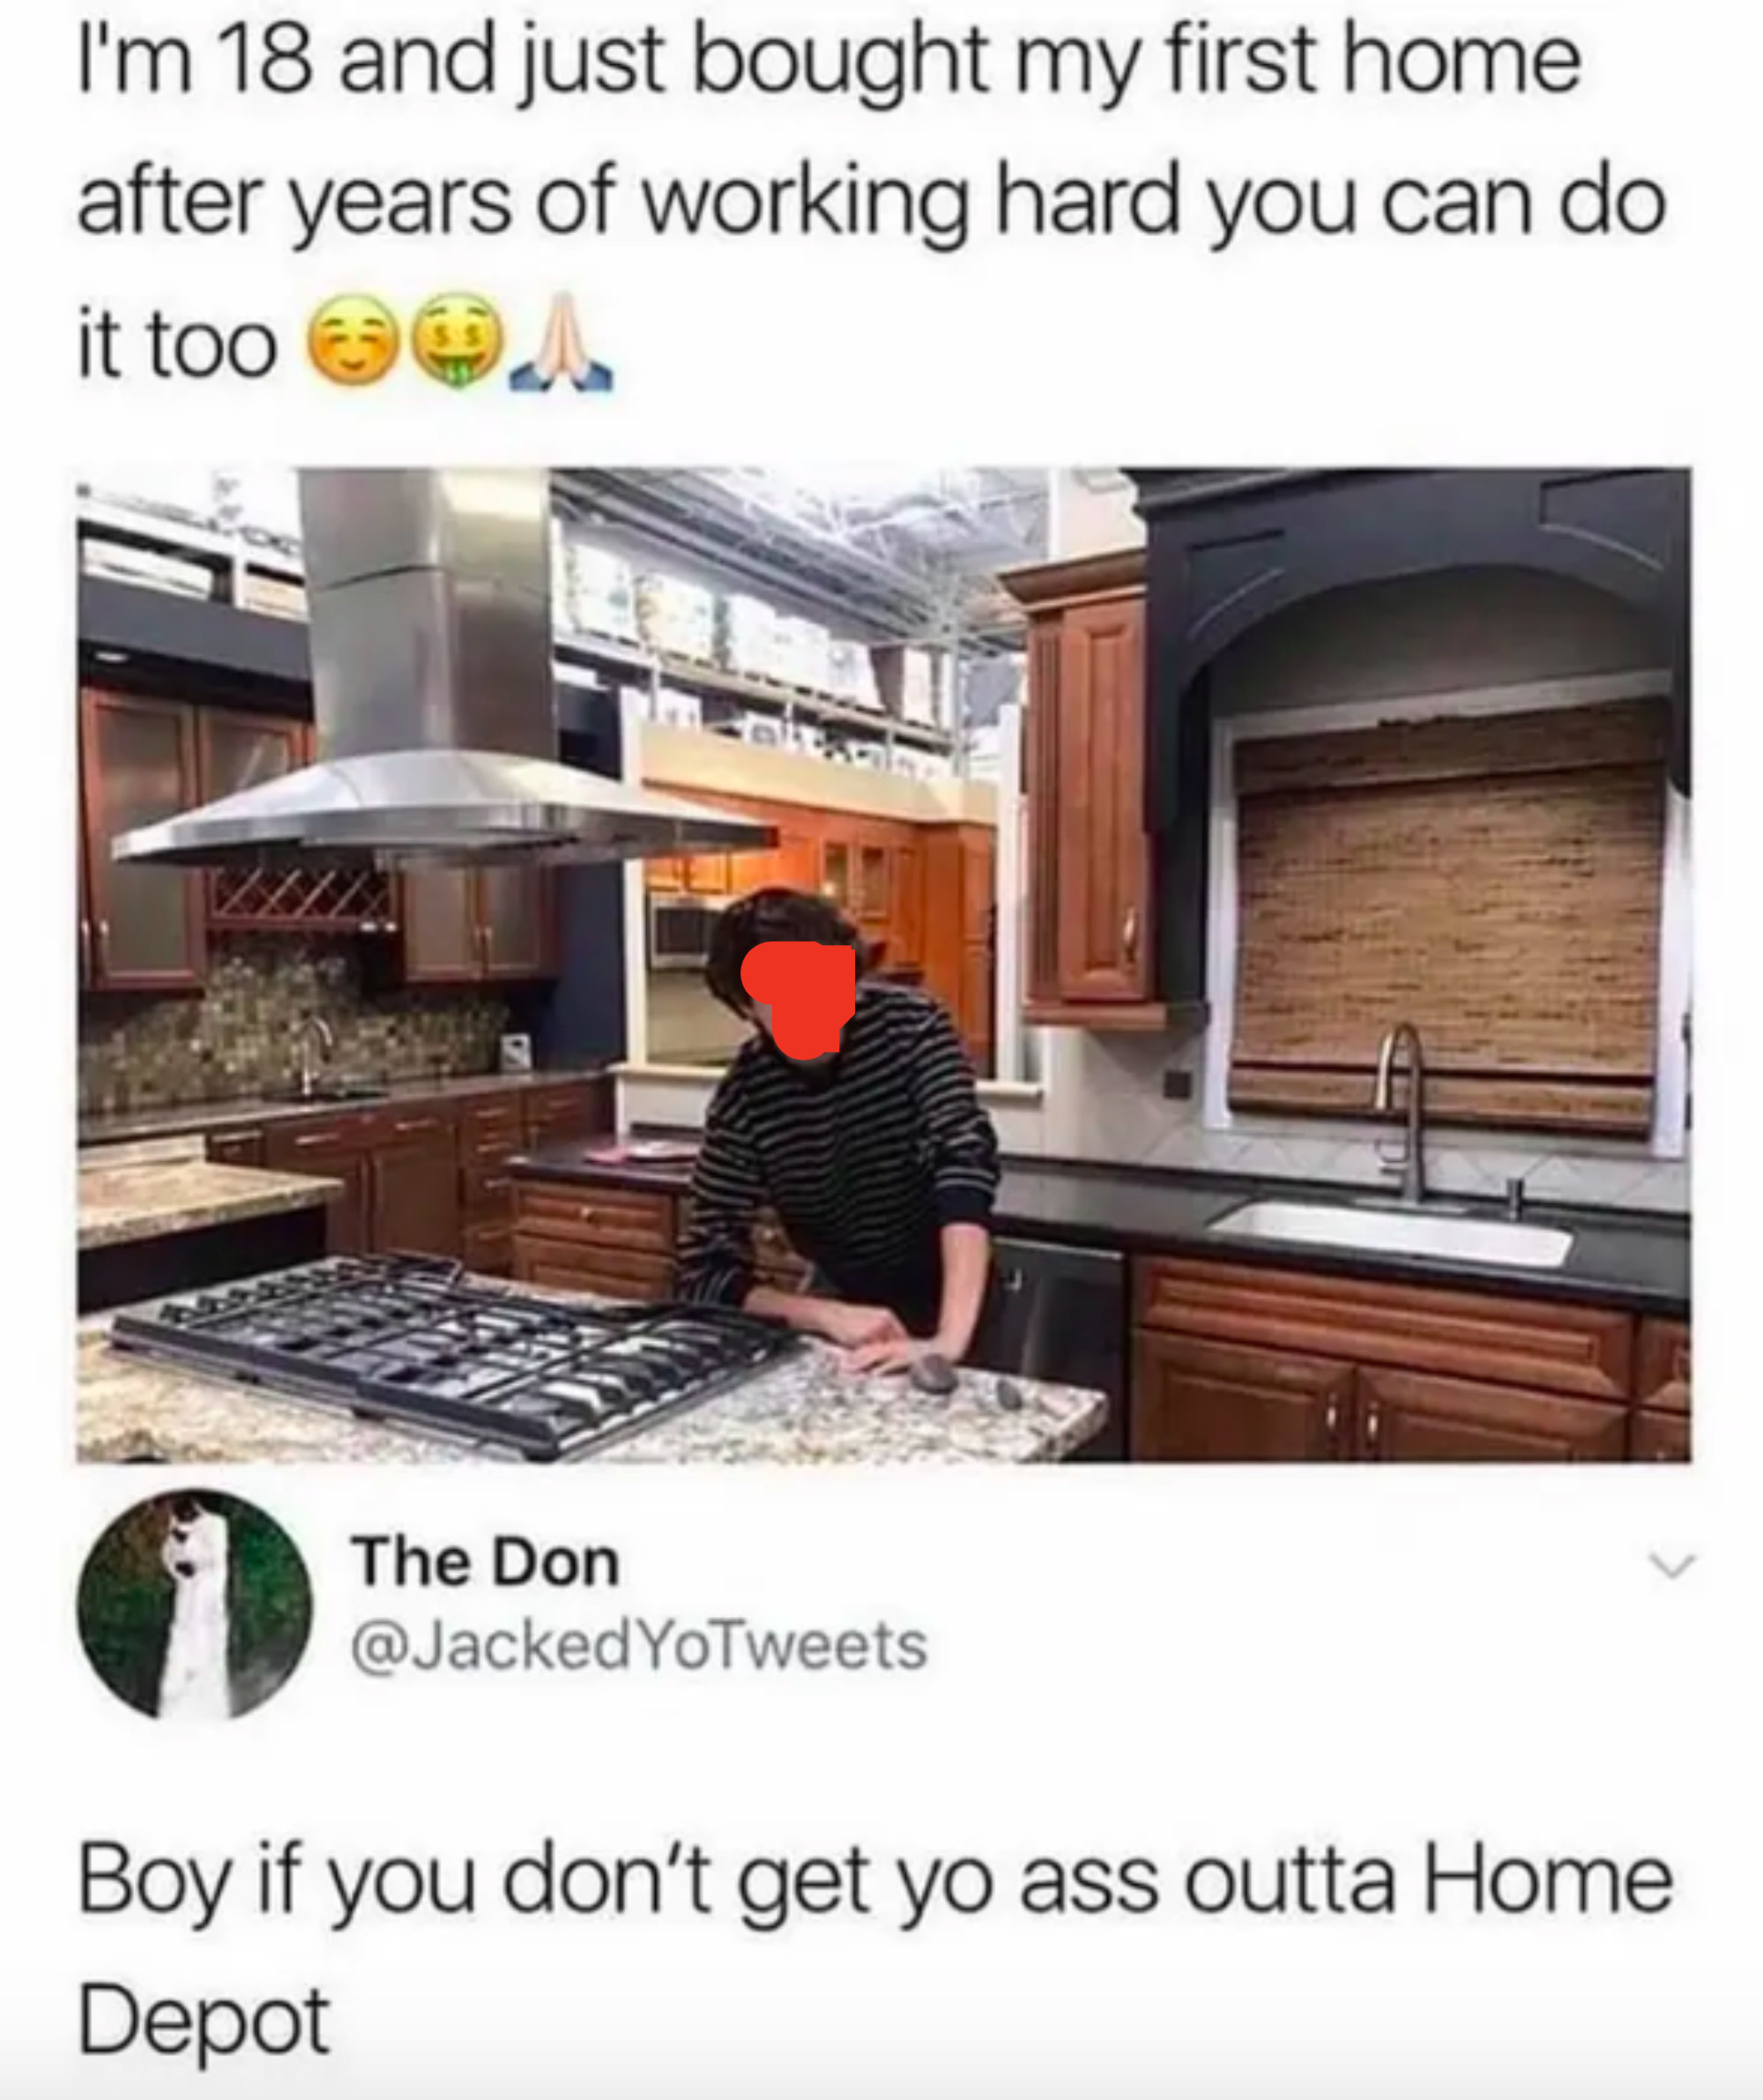 Person standing in a kitchen who says they bought their first home at age 18 is told to get out of Home Depot